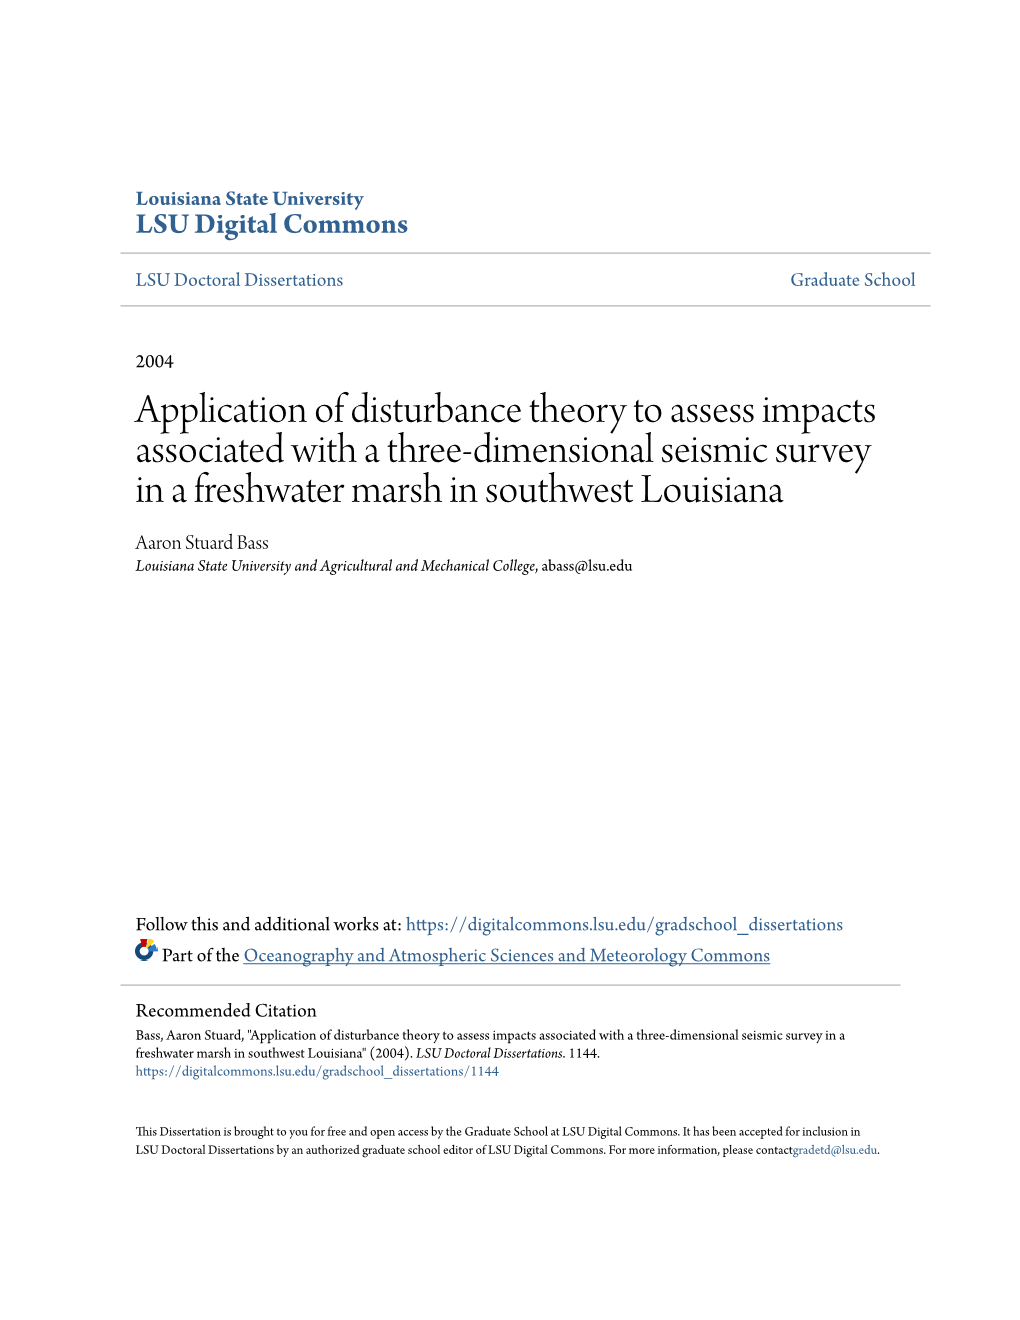 Application of Disturbance Theory to Assess Impacts Associated with A